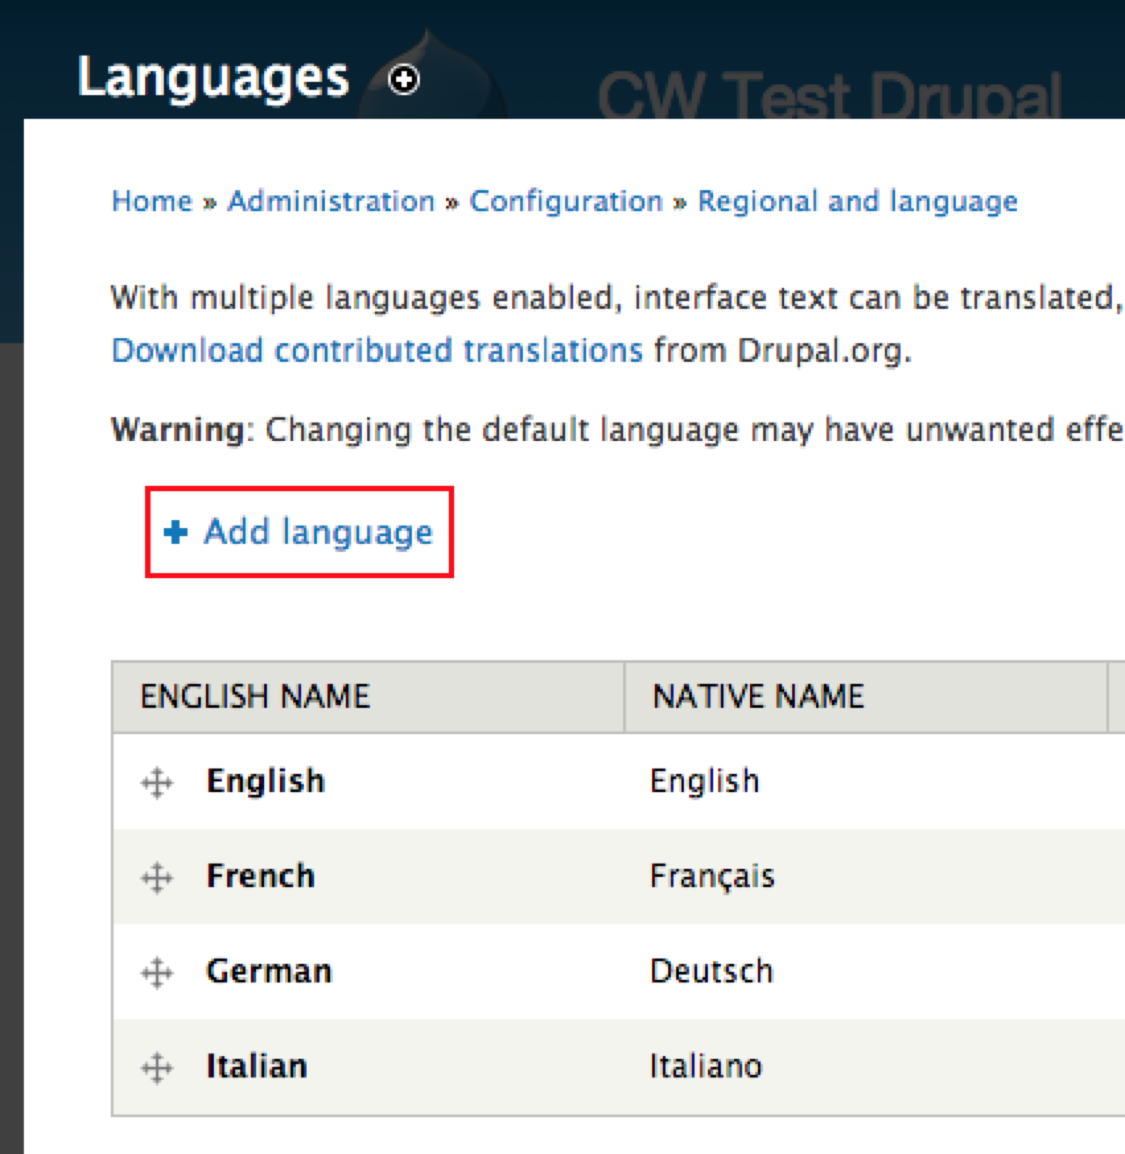 admin interface with the option to add language in red box, and four languages listed below